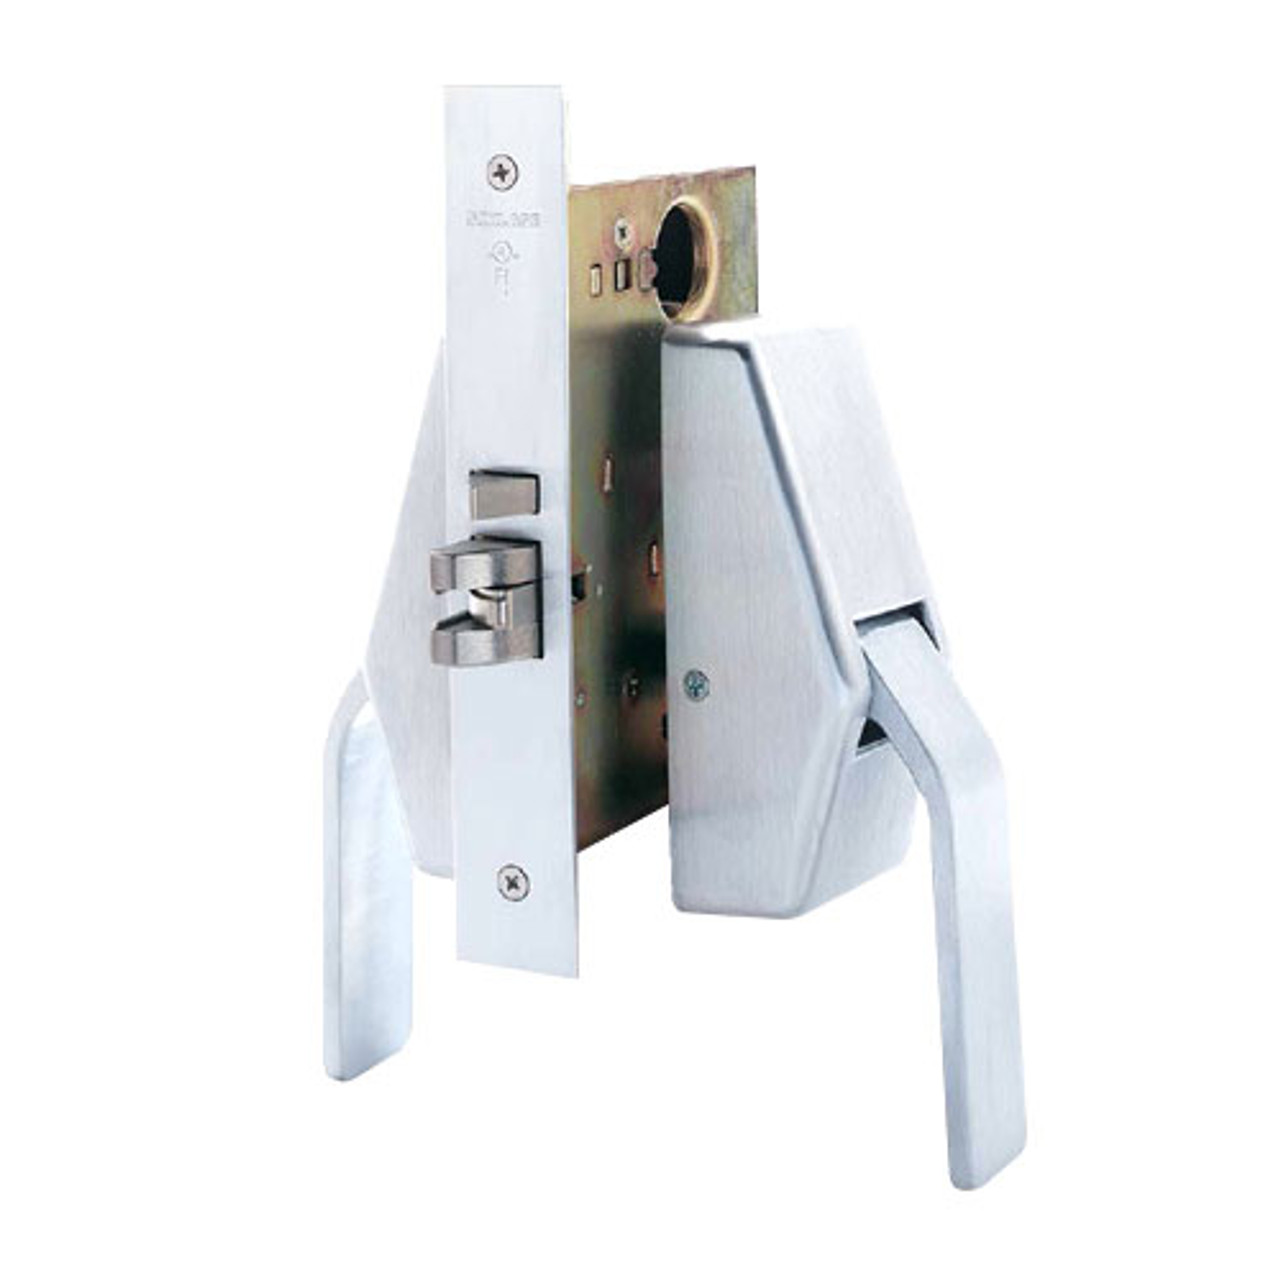 HL6-9040-625 Glynn Johnson HL6 Series Privacy Thumbturn Function Push and Pull latch with Mortise Lock in Bright Chrome Finish